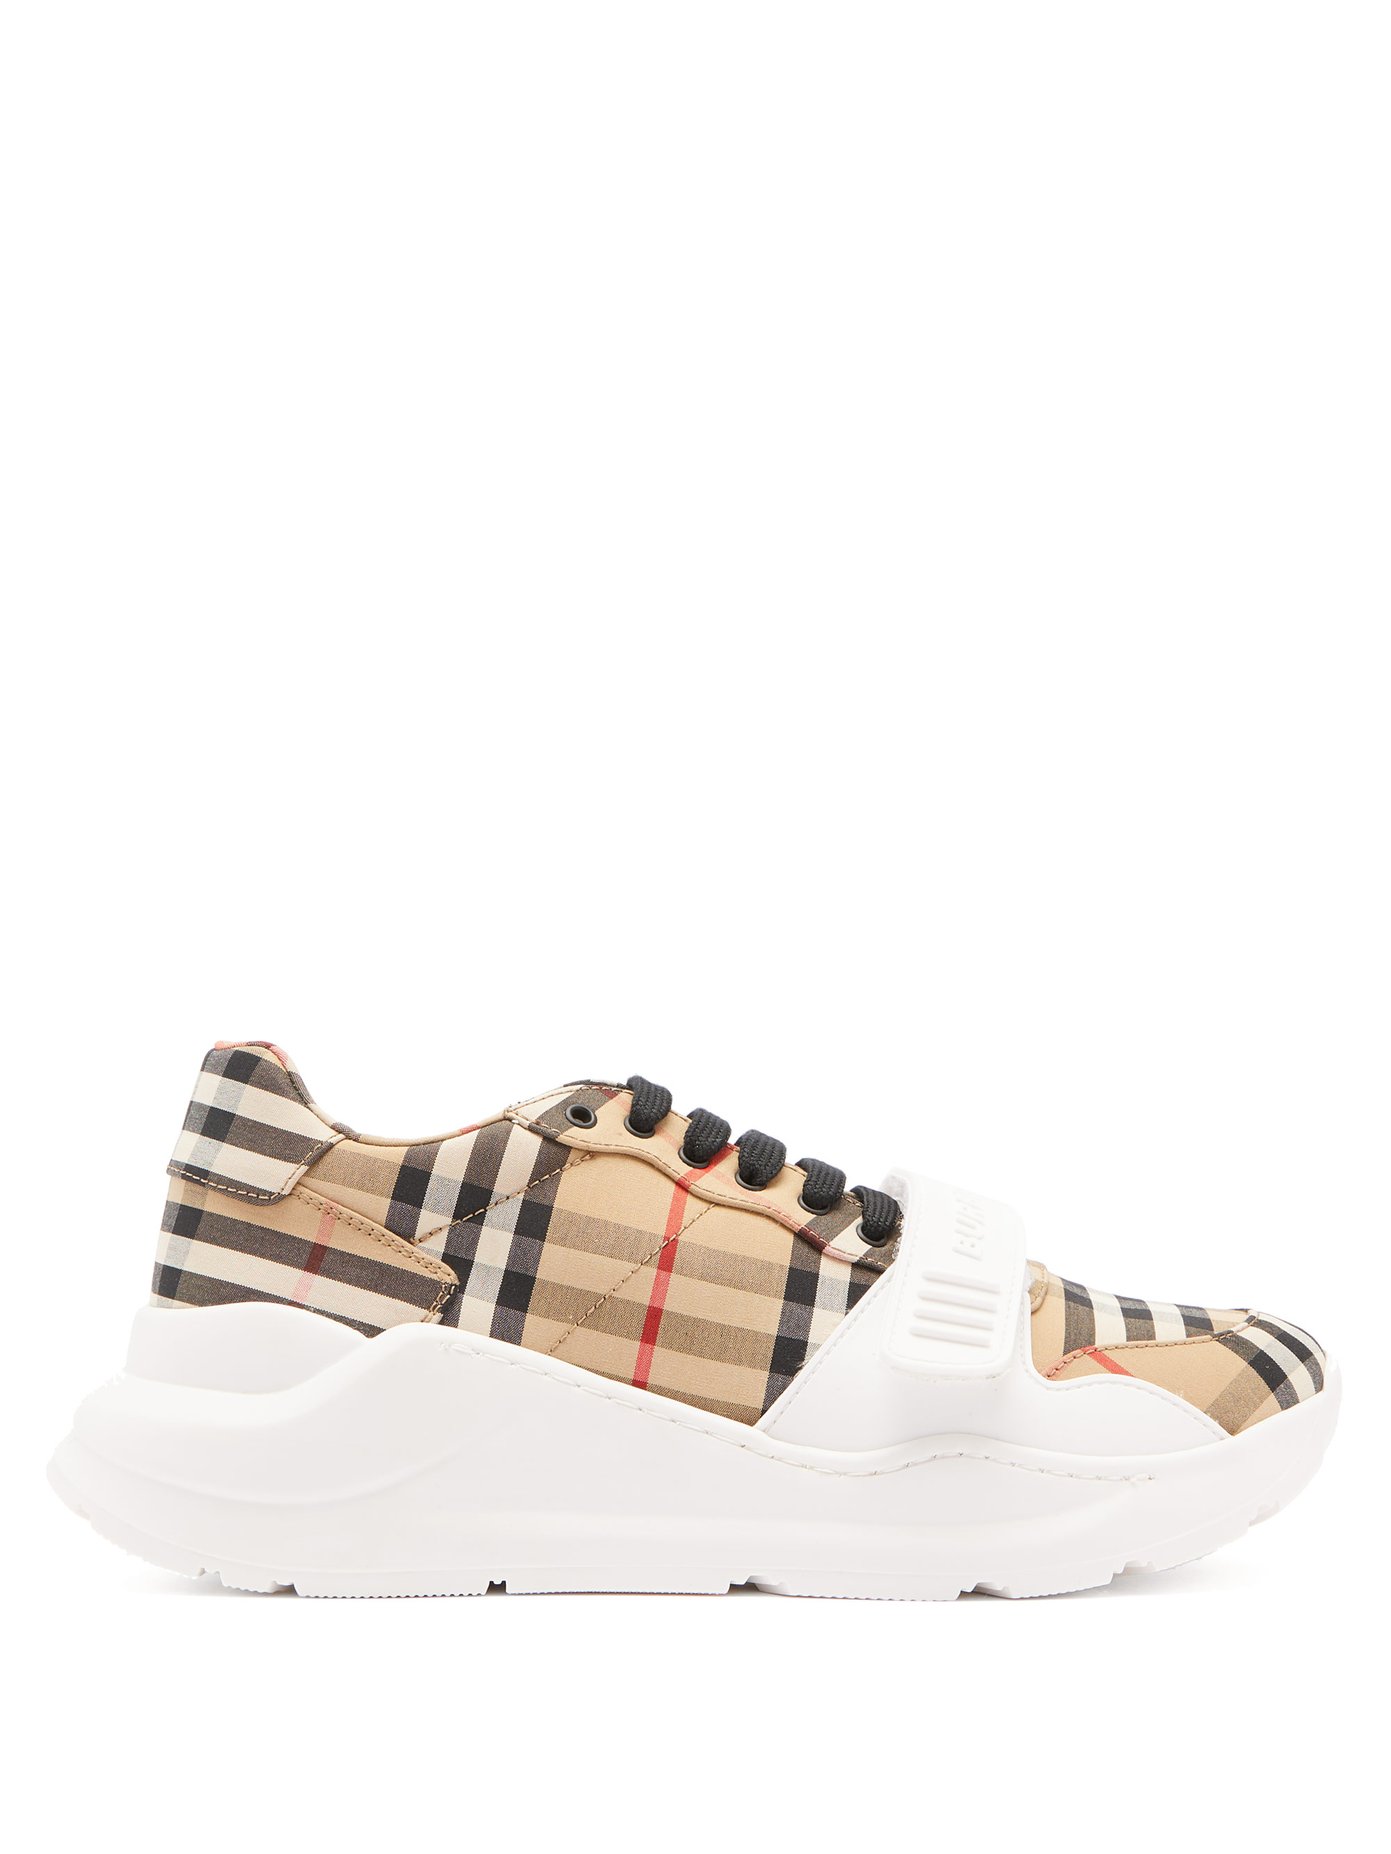 burberry trainers uk